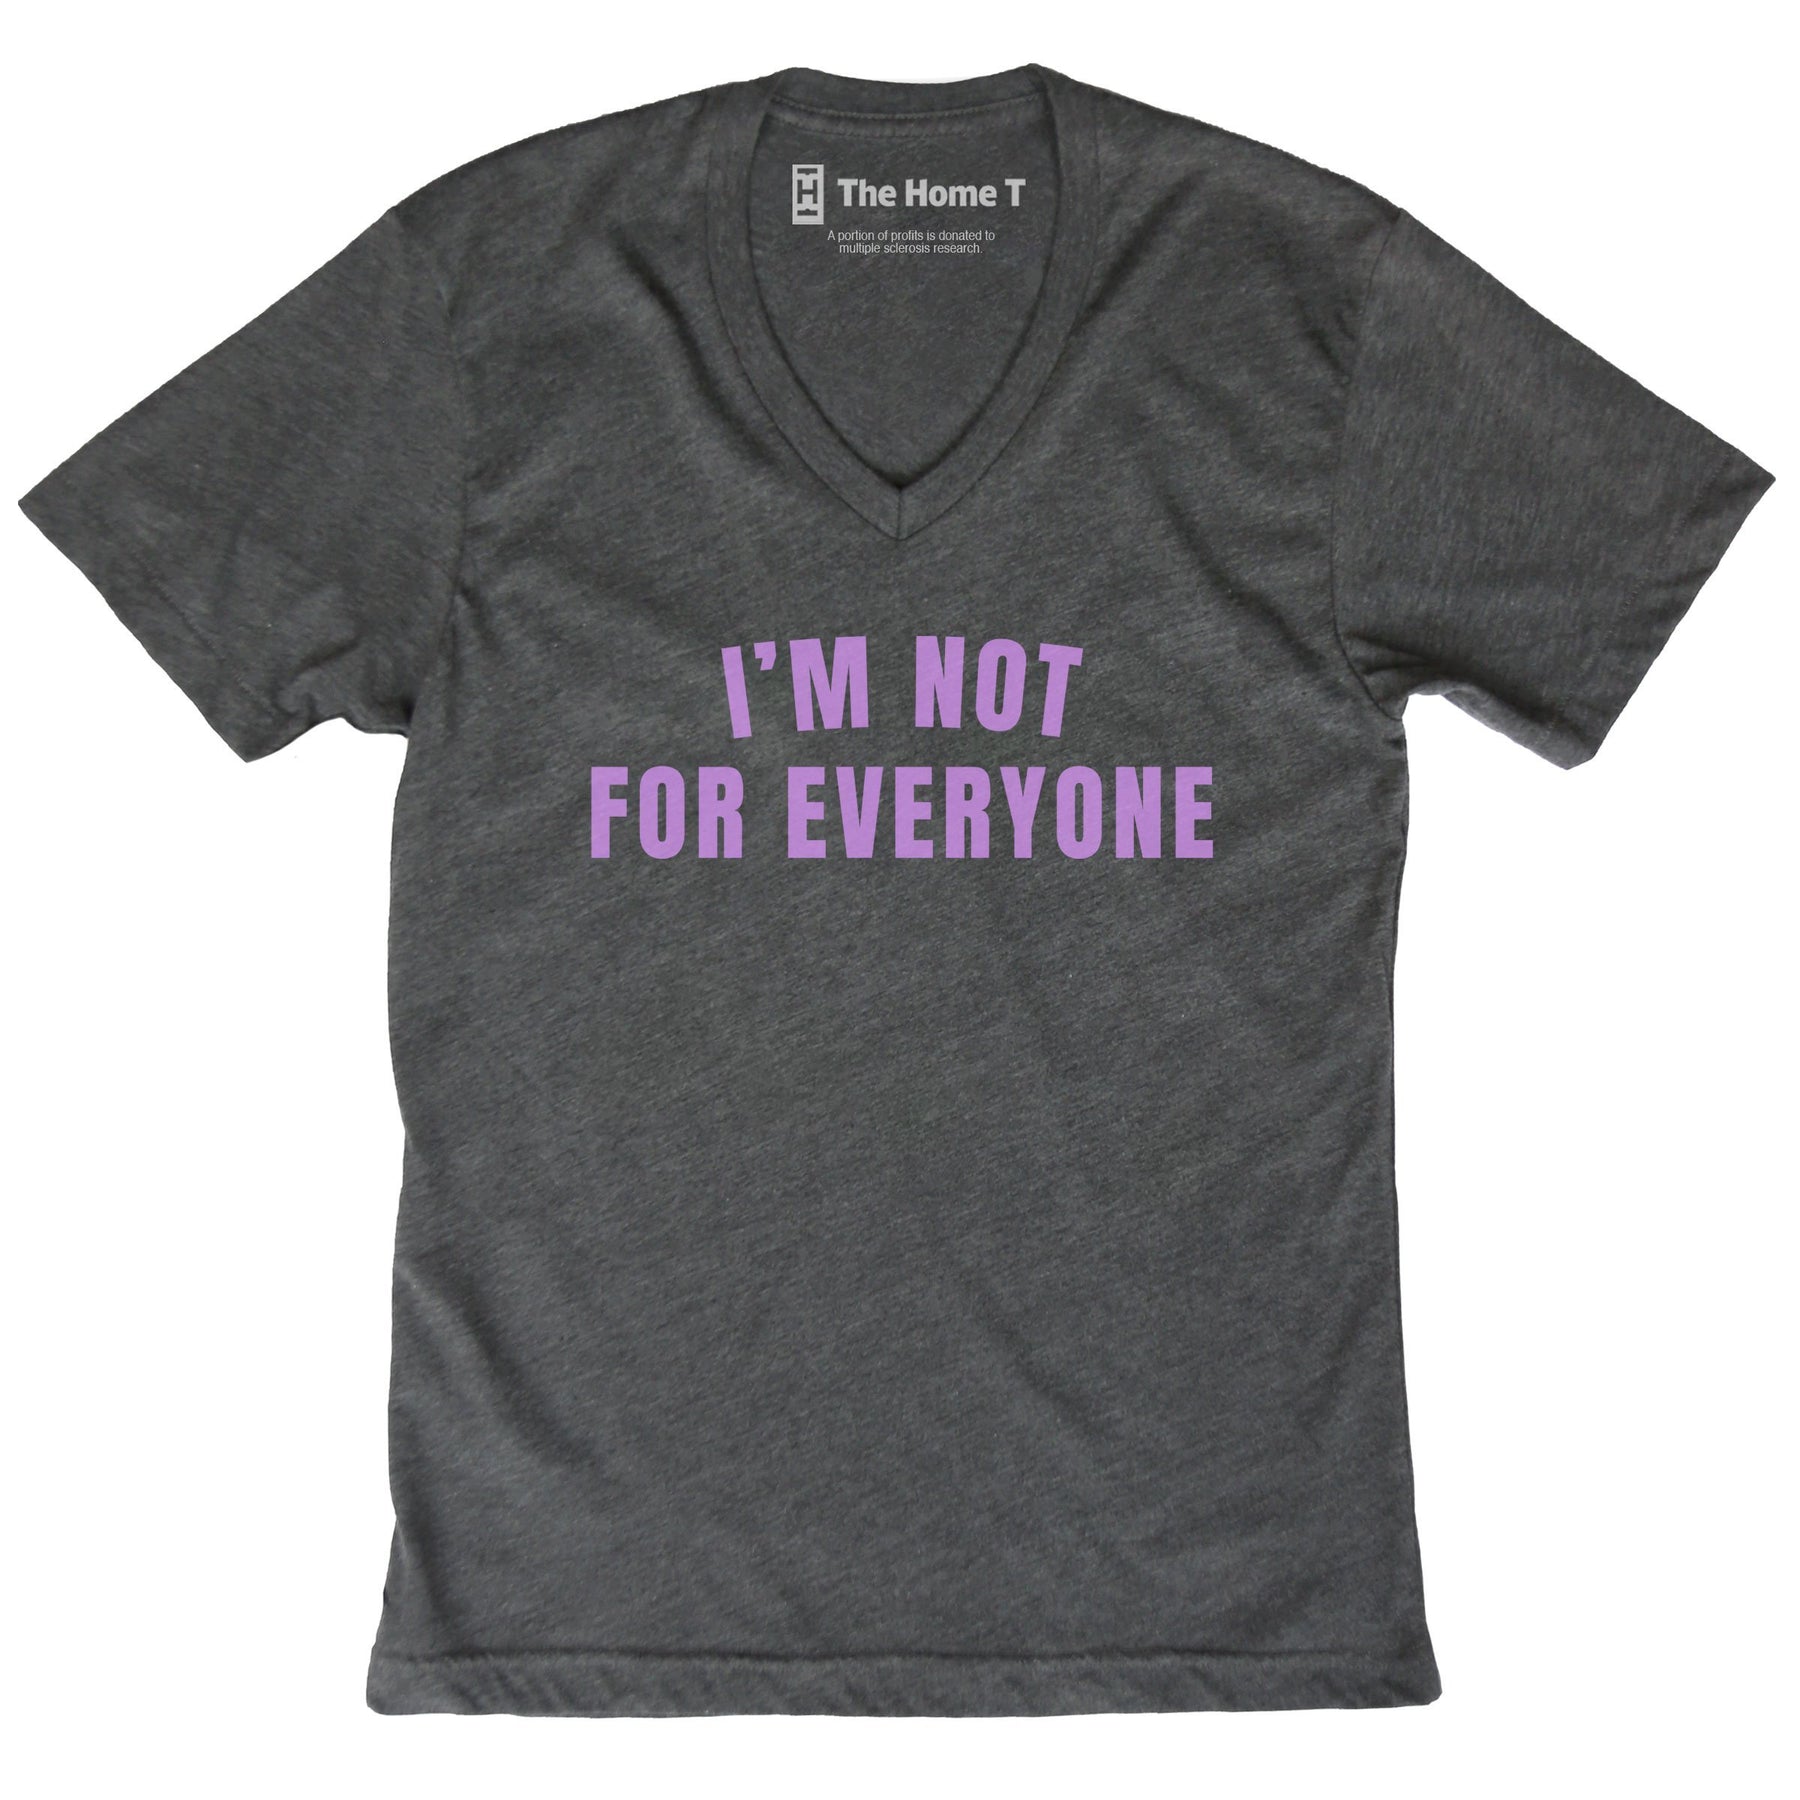 I'M NOT FOR EVERYONE The Home T XS VNECK